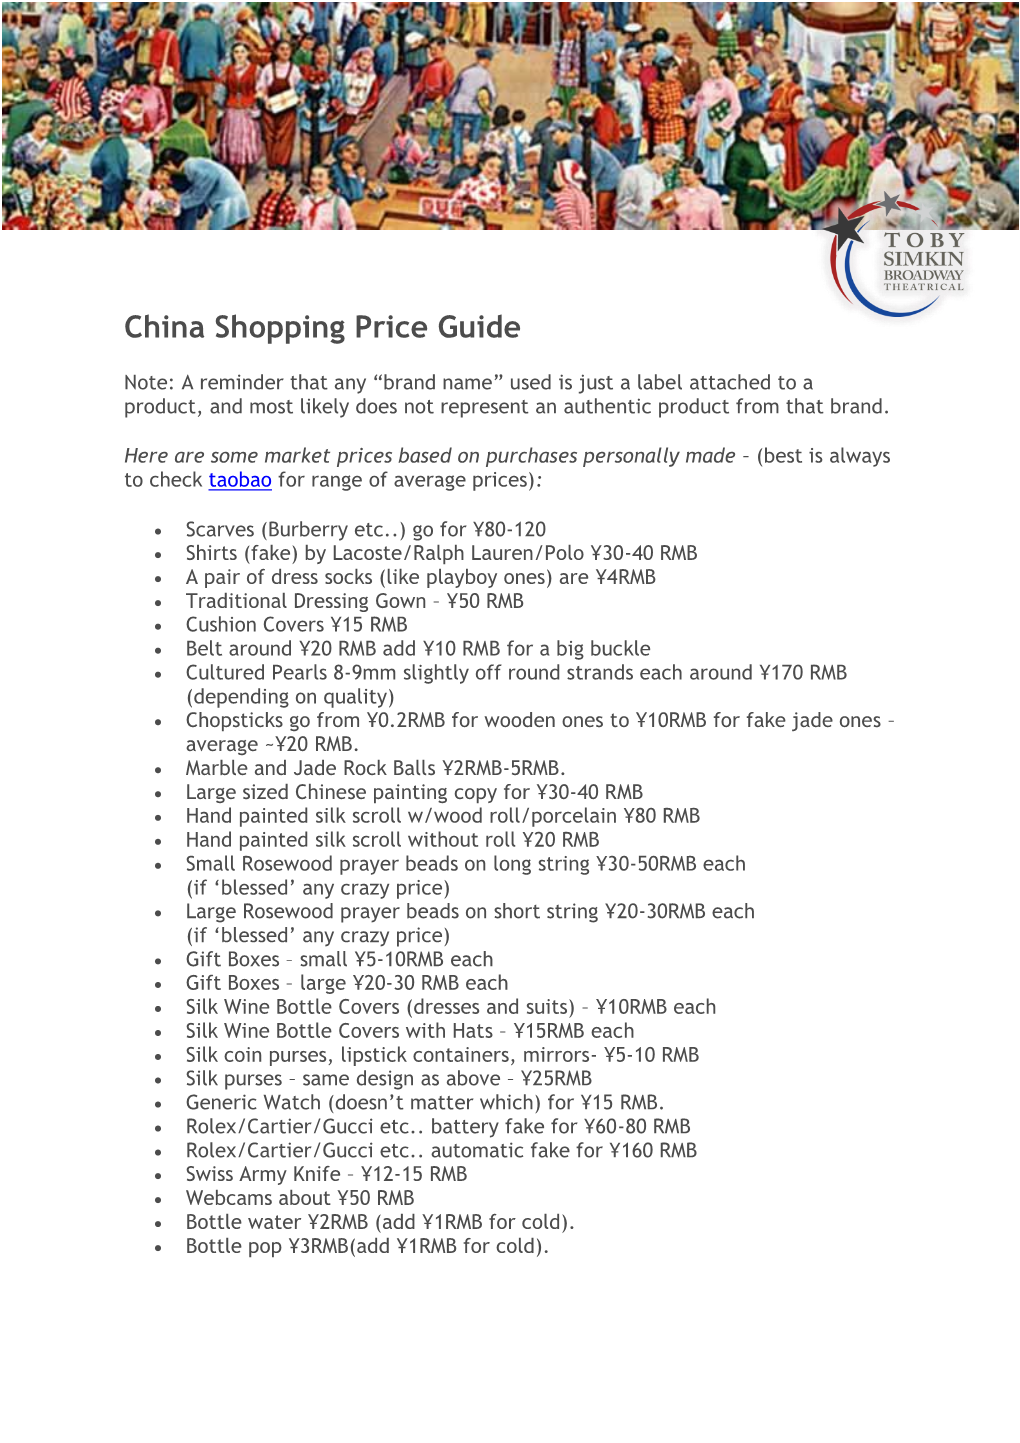 China Shopping Price Guide Page 1 of 66